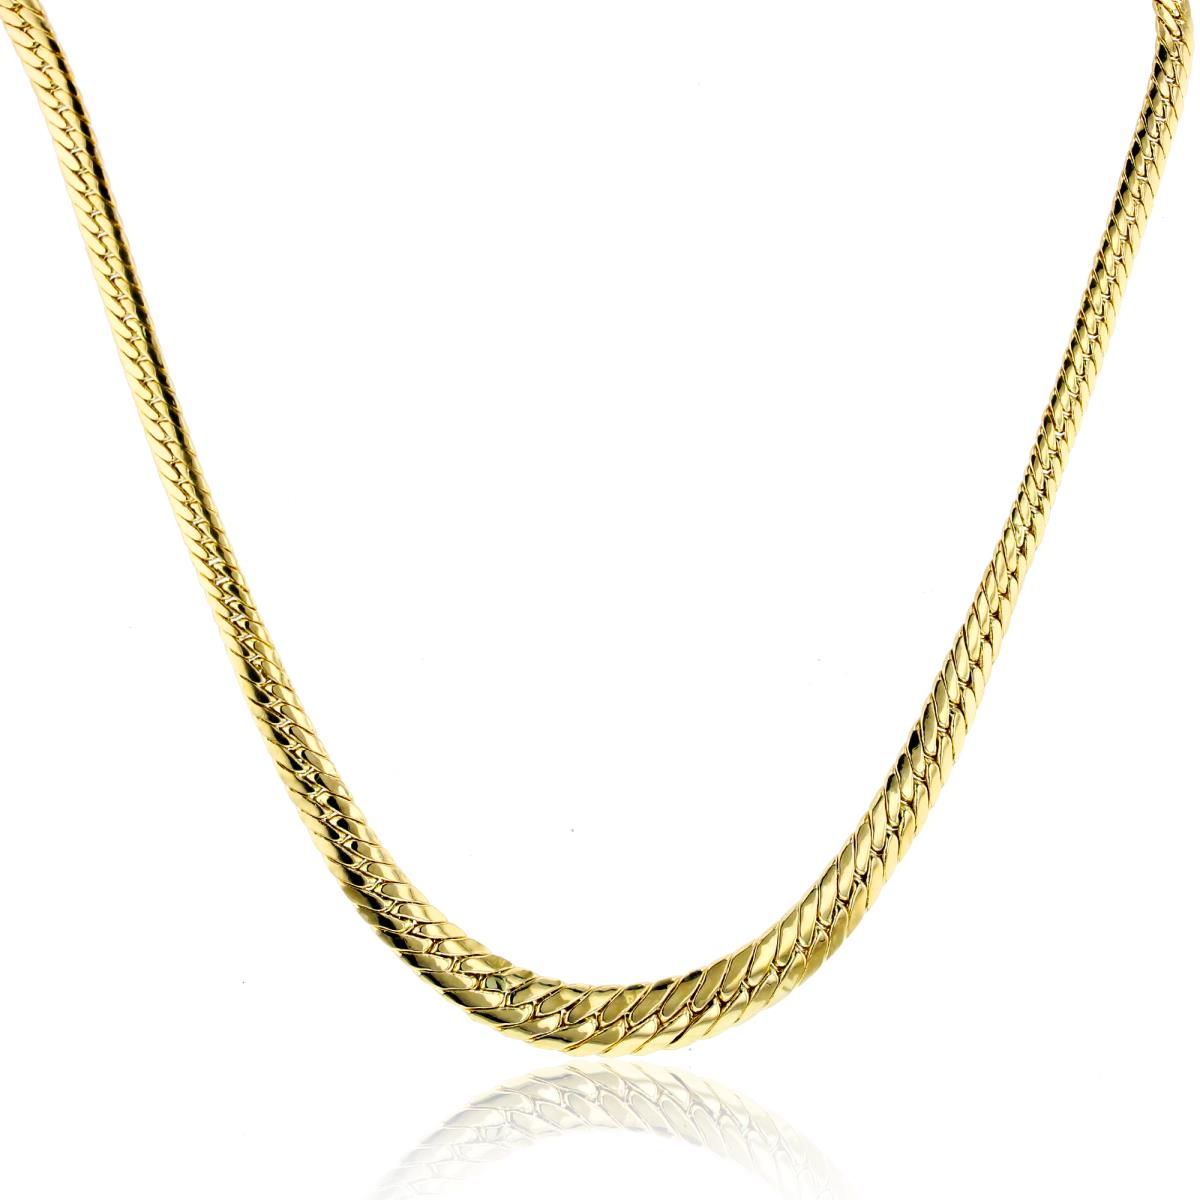 10K Yellow Gold Flexy Rope Linked 17.5"Necklace